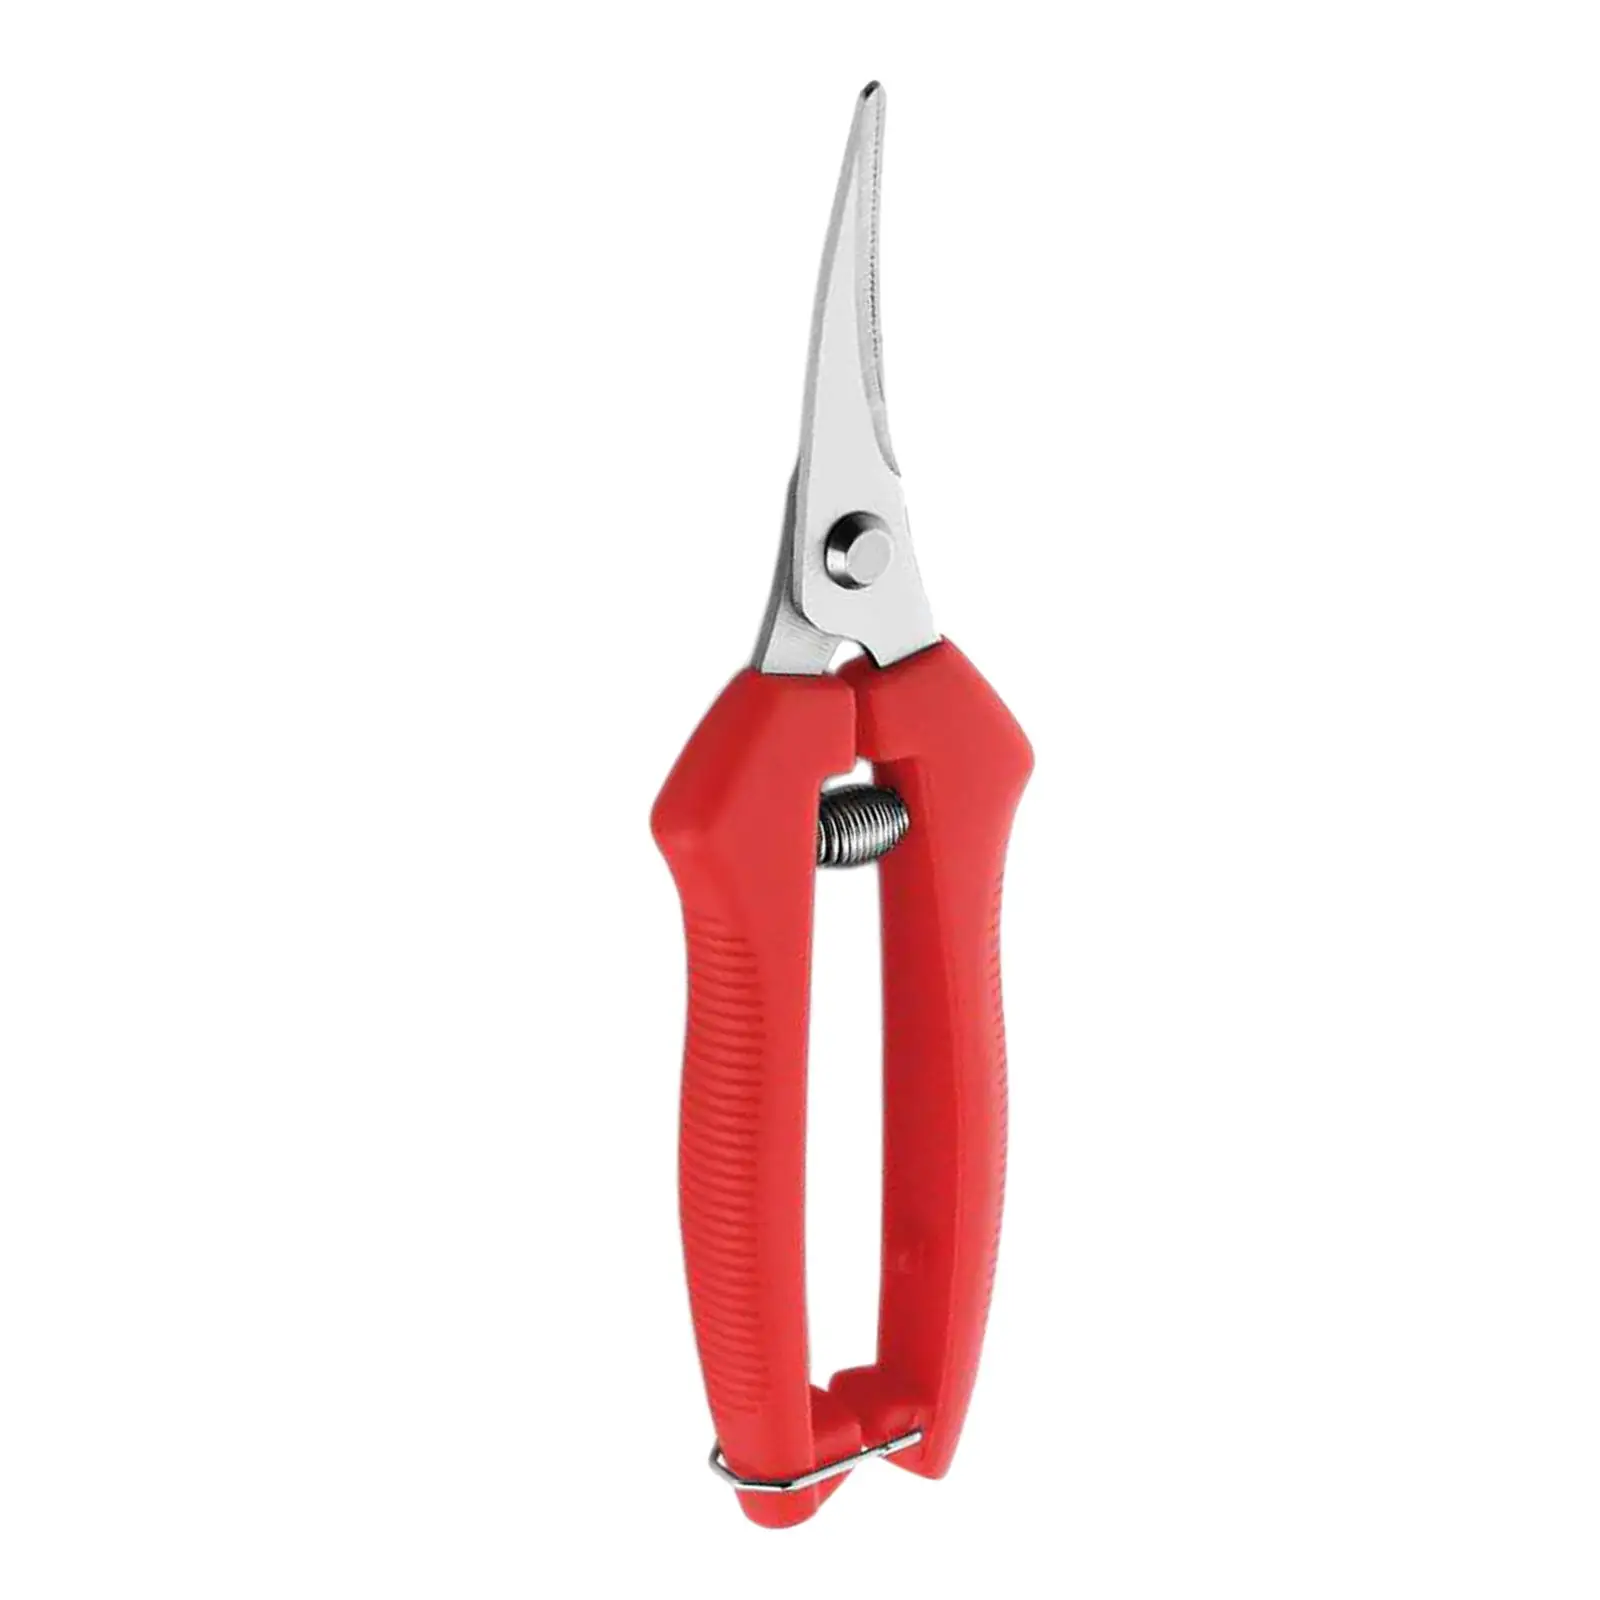 Fruit Picking Shears Scissors with Protective Sleeve Gardening Hand Pruners Fruit Picker Scissors for Garden Thinning Pruning